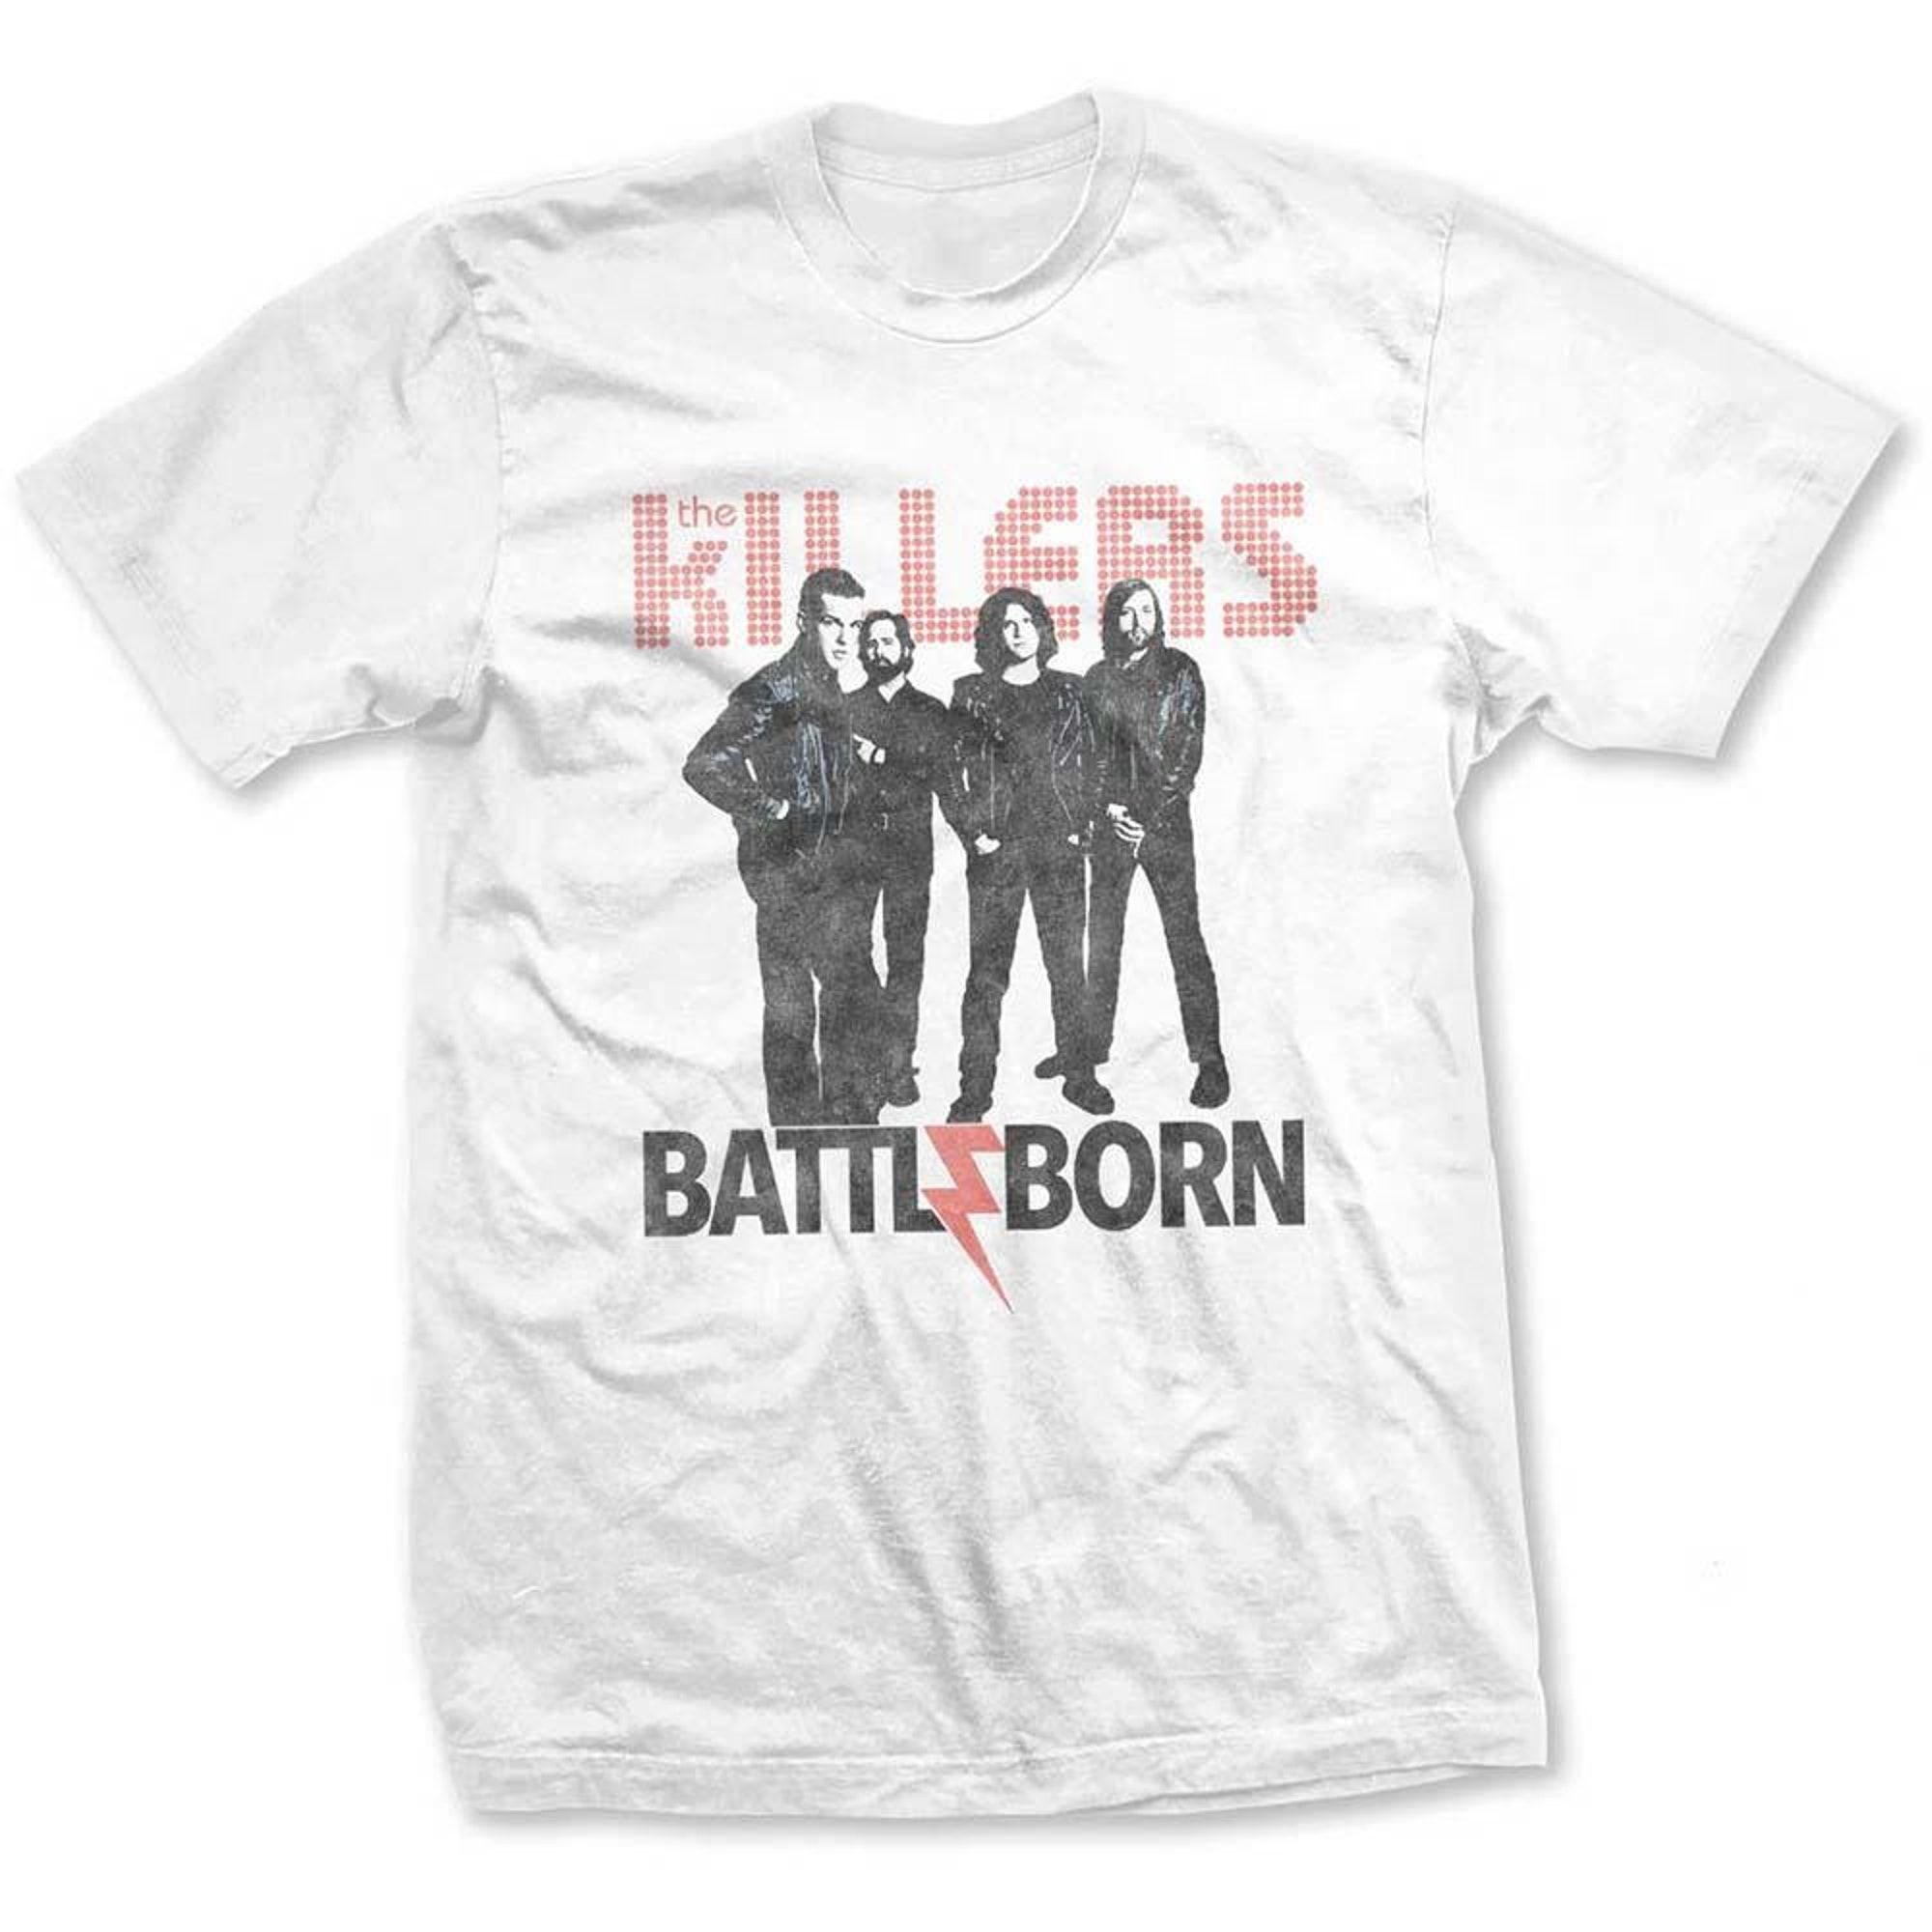 Discover The Killers Unisex Tee: Battle Born